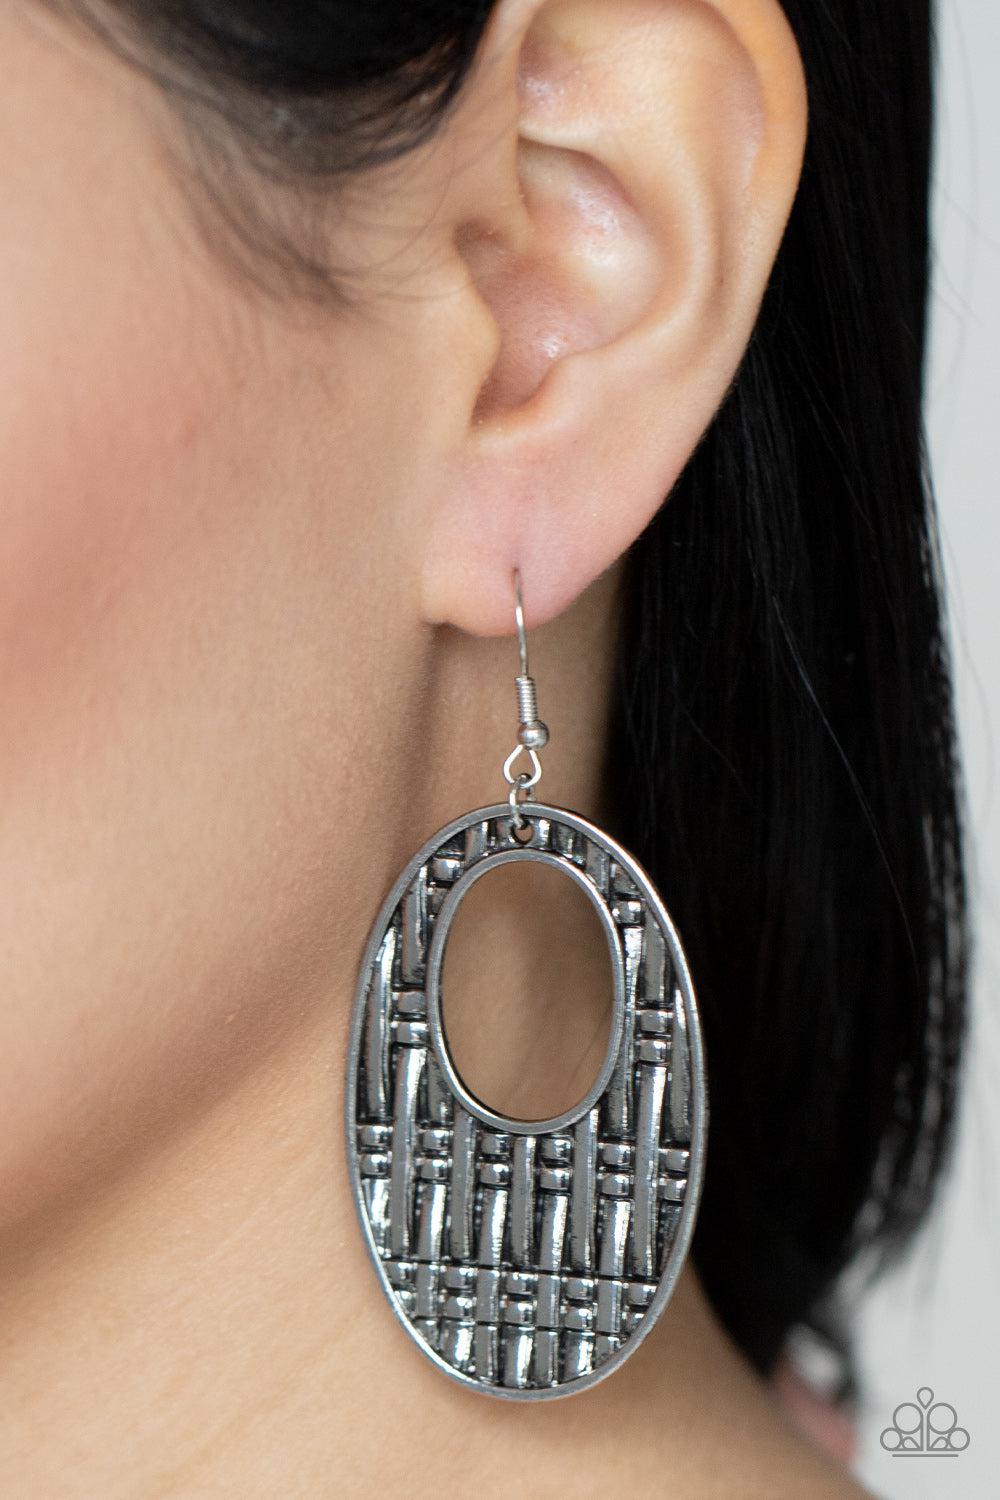 Engraved Edge Silver Earrings - Paparazzi Accessories- lightbox - CarasShop.com - $5 Jewelry by Cara Jewels